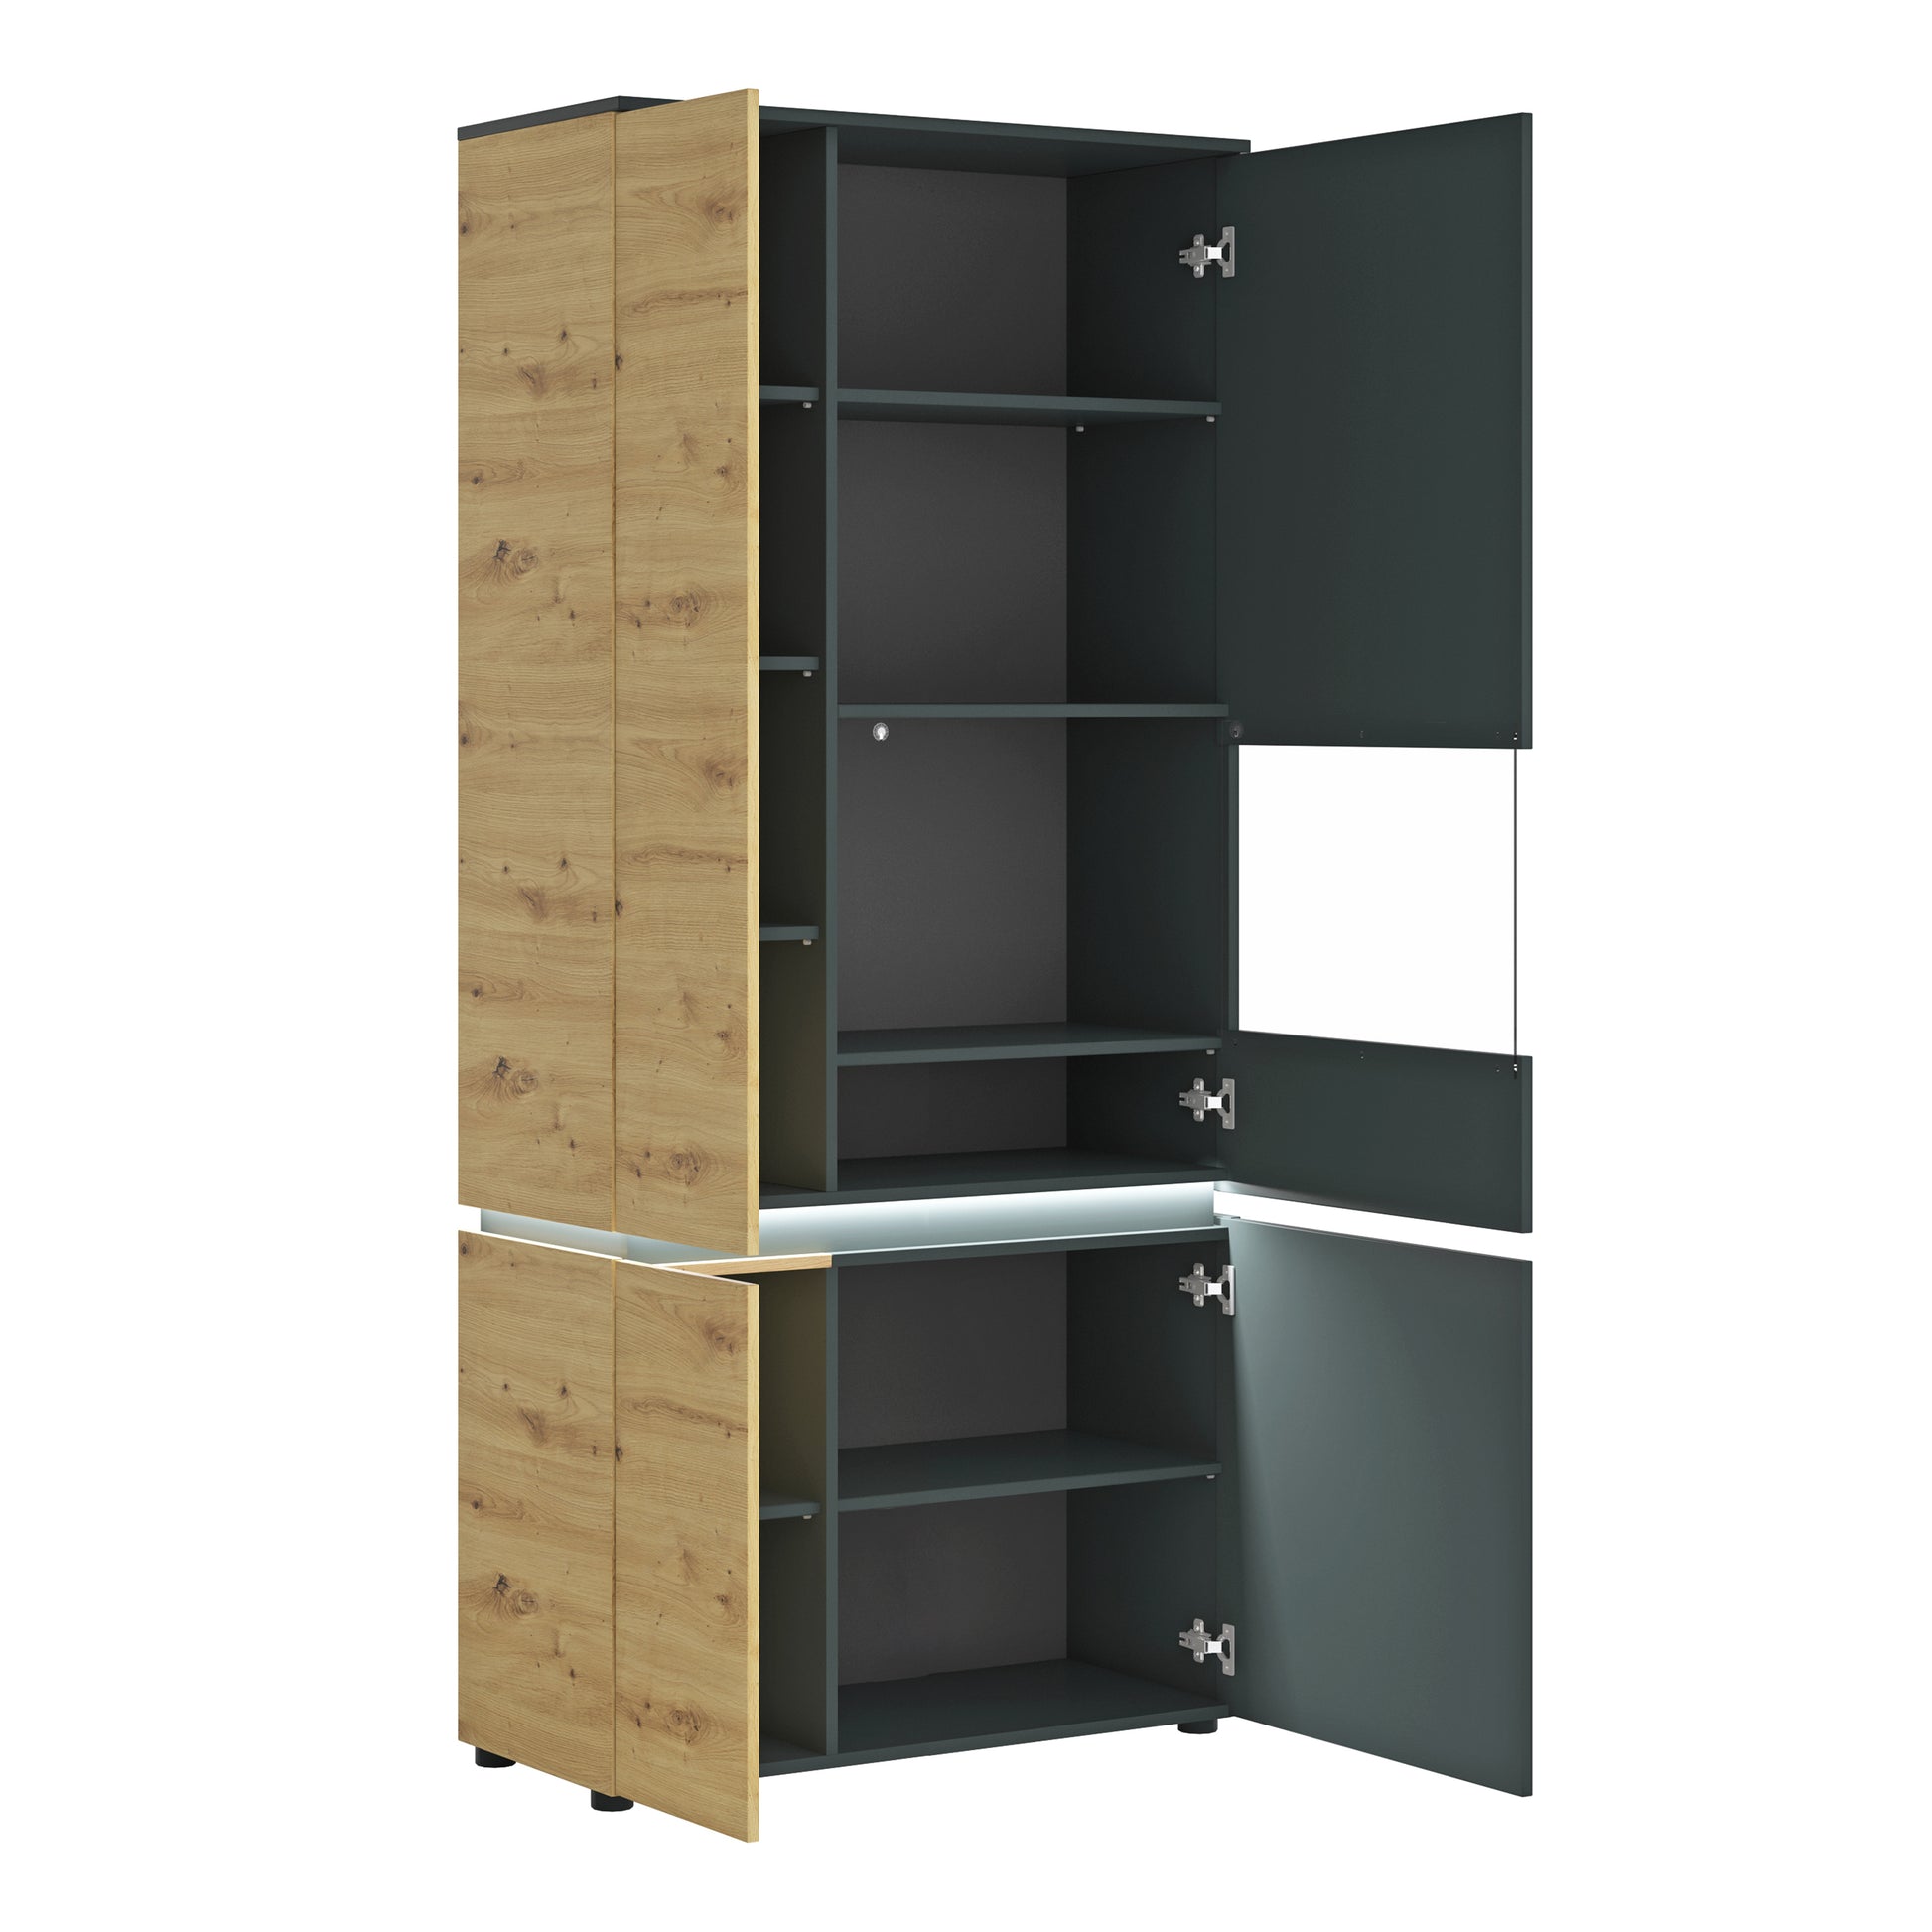 Luci Dark Luci 4 door tall display cabinet RH (including LED lighting) in Platinum and Oak